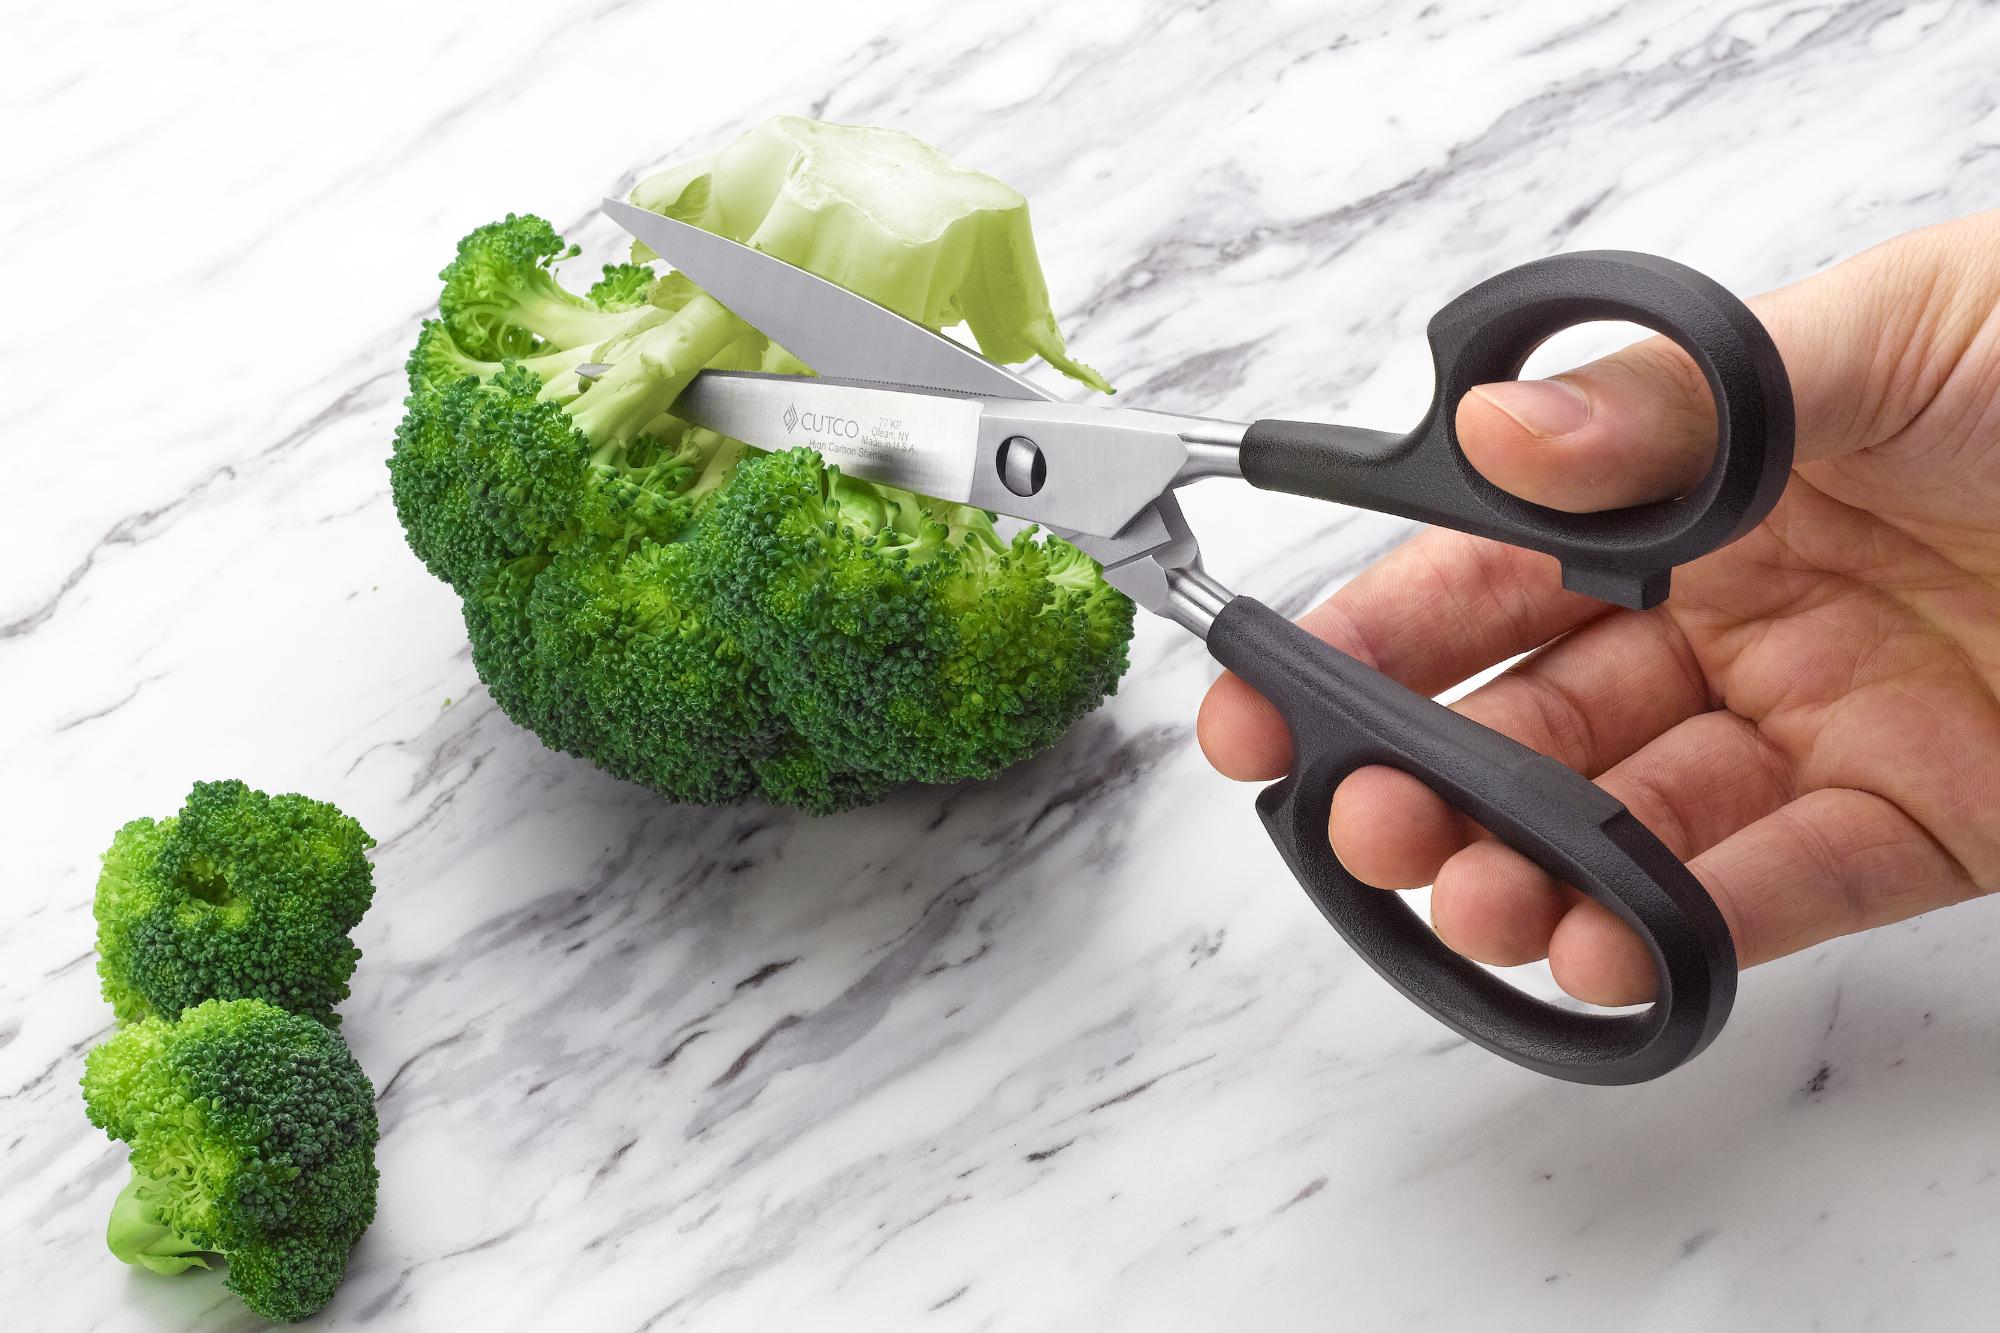 Cutting broccoli florets with Super Shears.